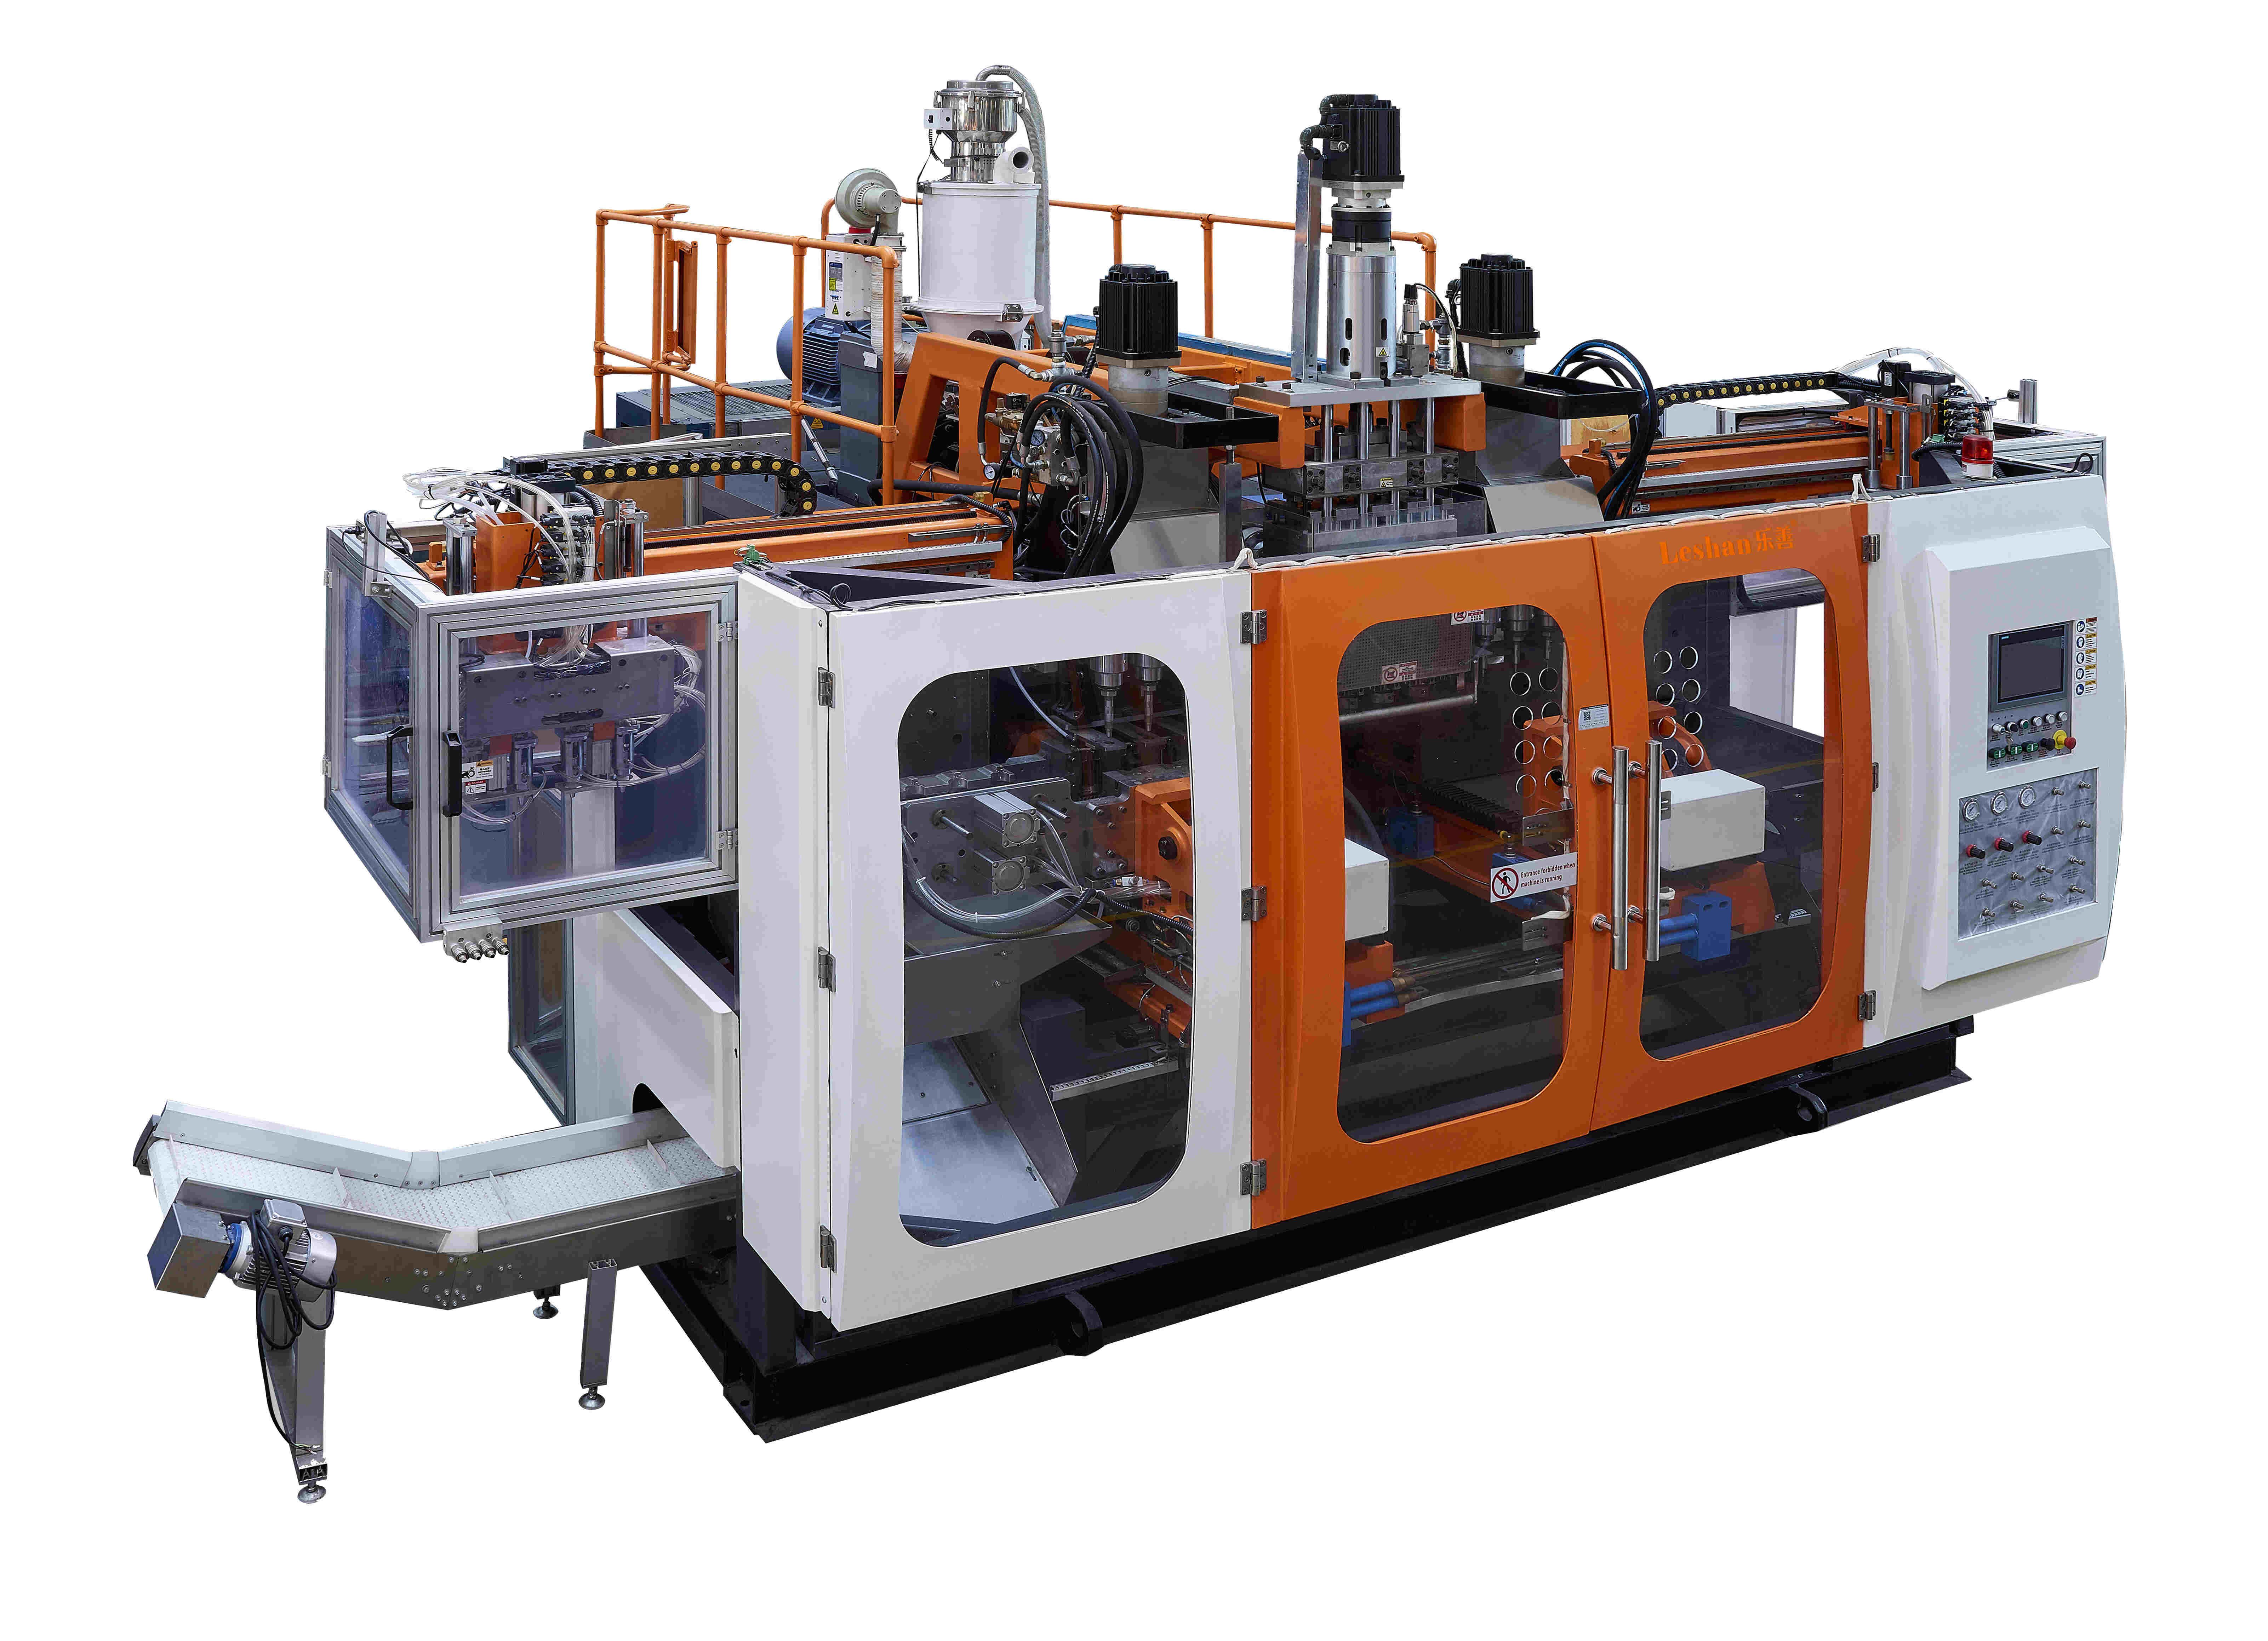 What is the cost composition of 50l accumulation blow molding machine?